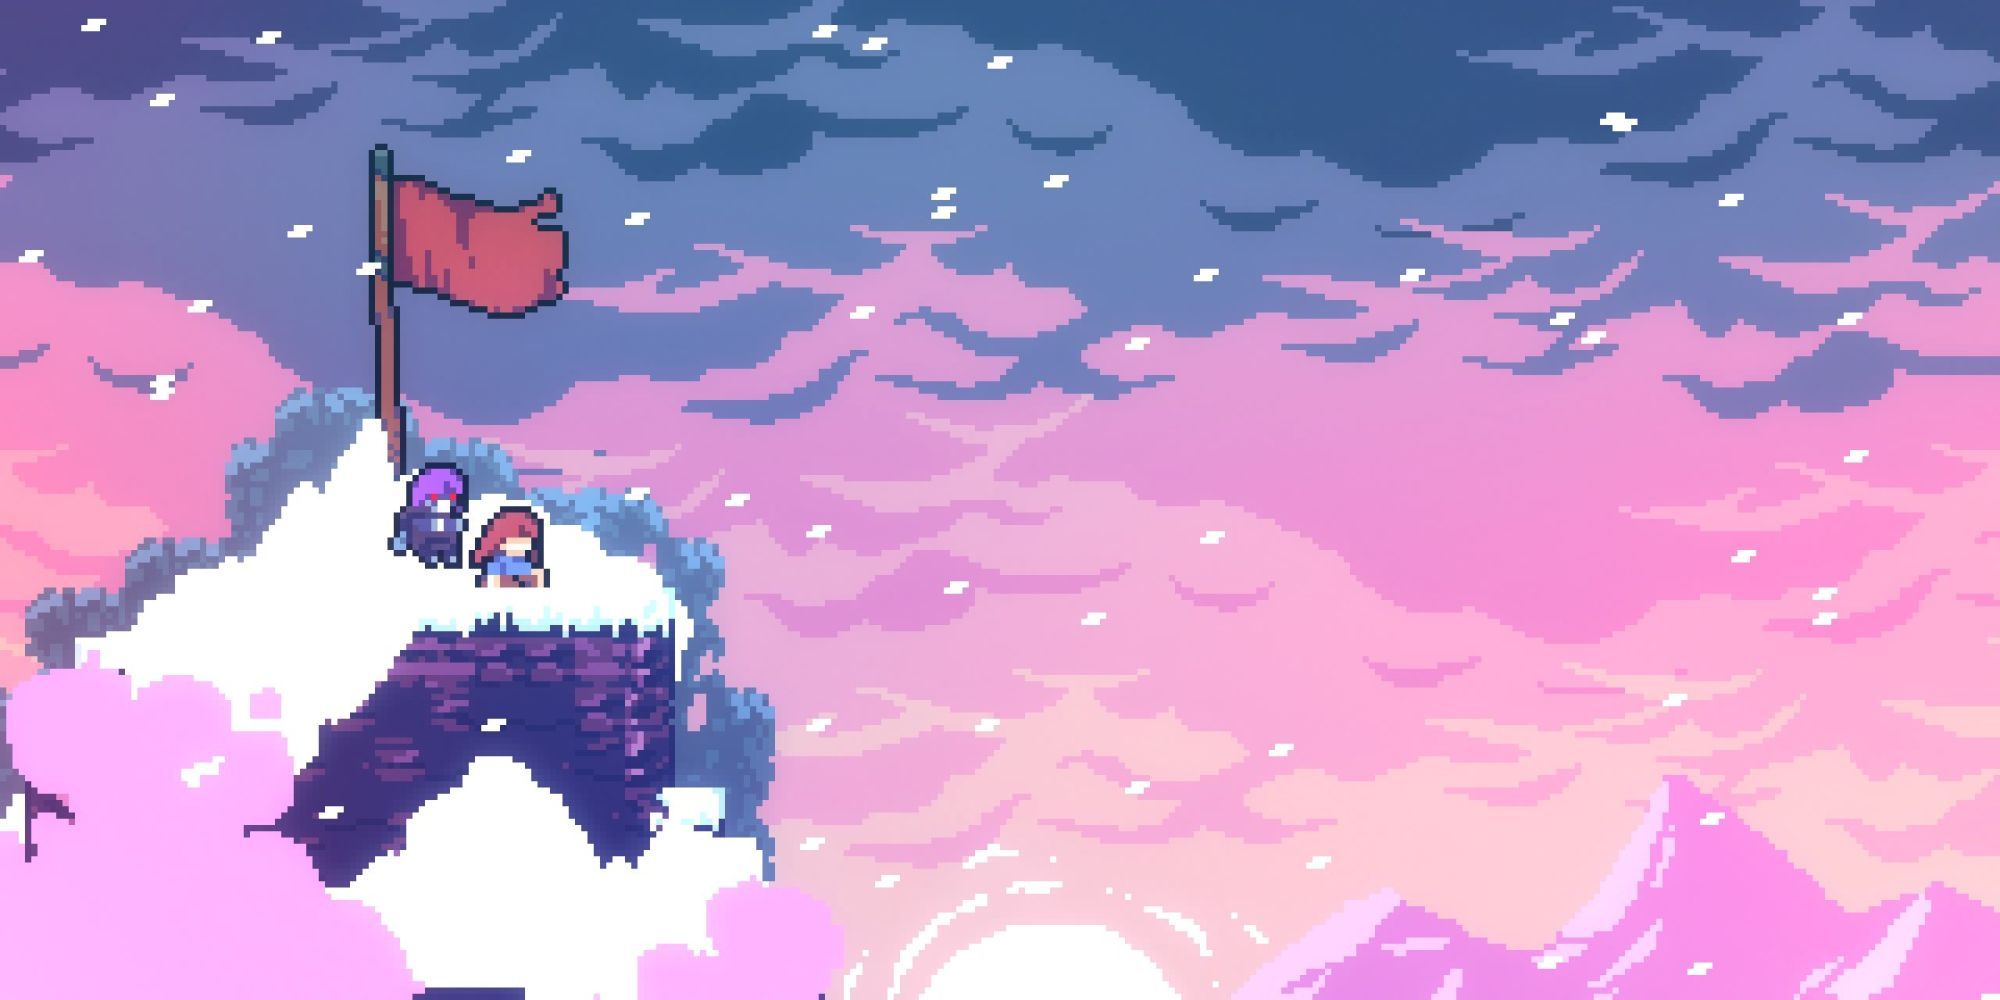 Image from the game Celeste featuring Badeline and Madeline on top of the snowy Celeste mountain.